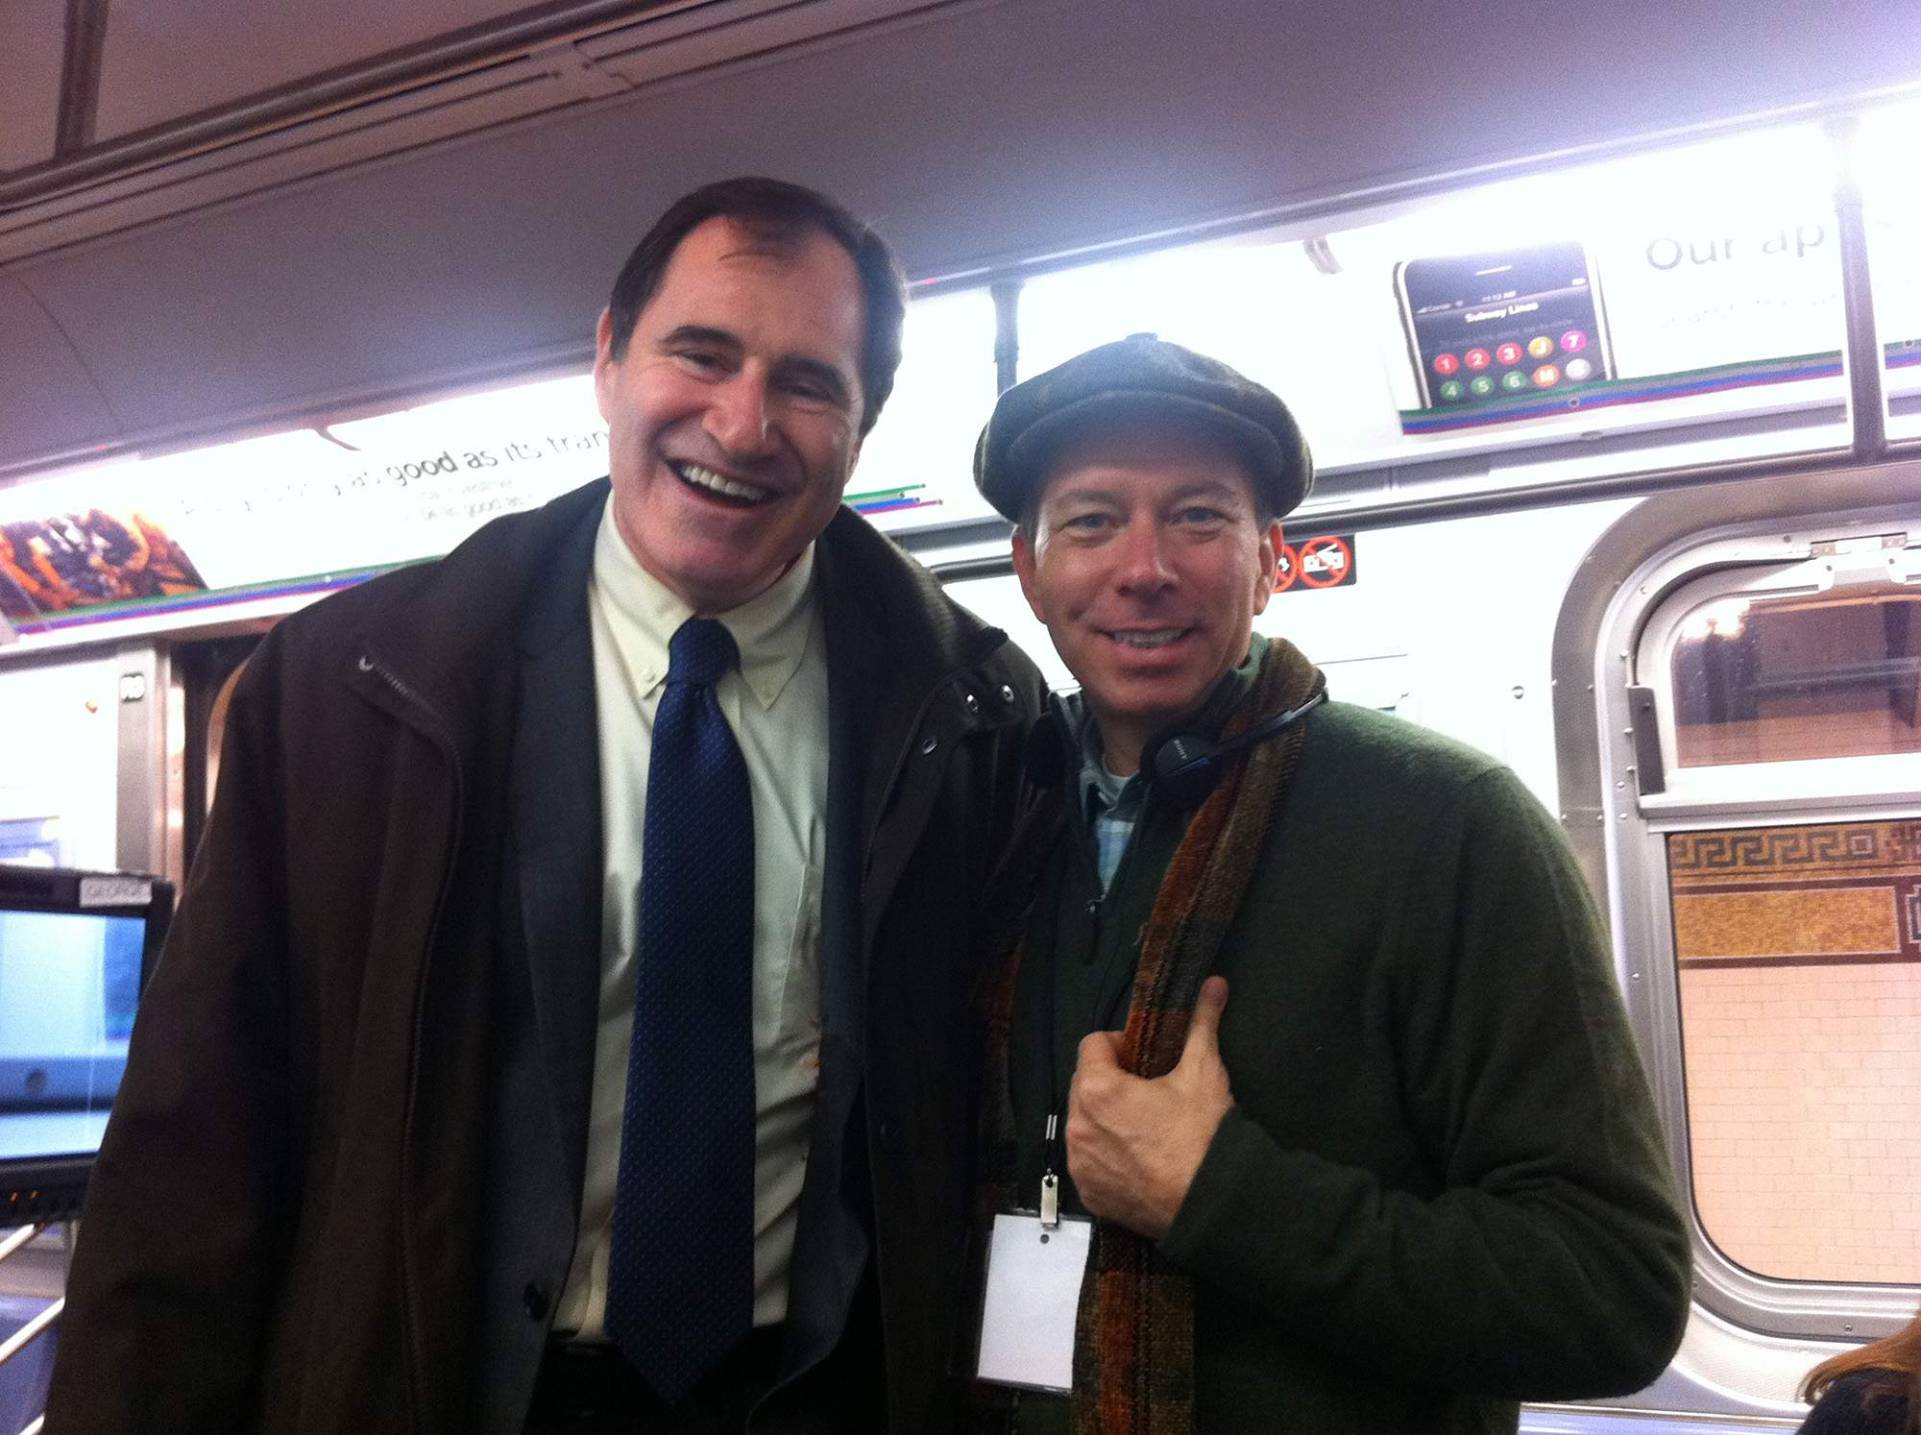 With guest star Richard Kind in a subway